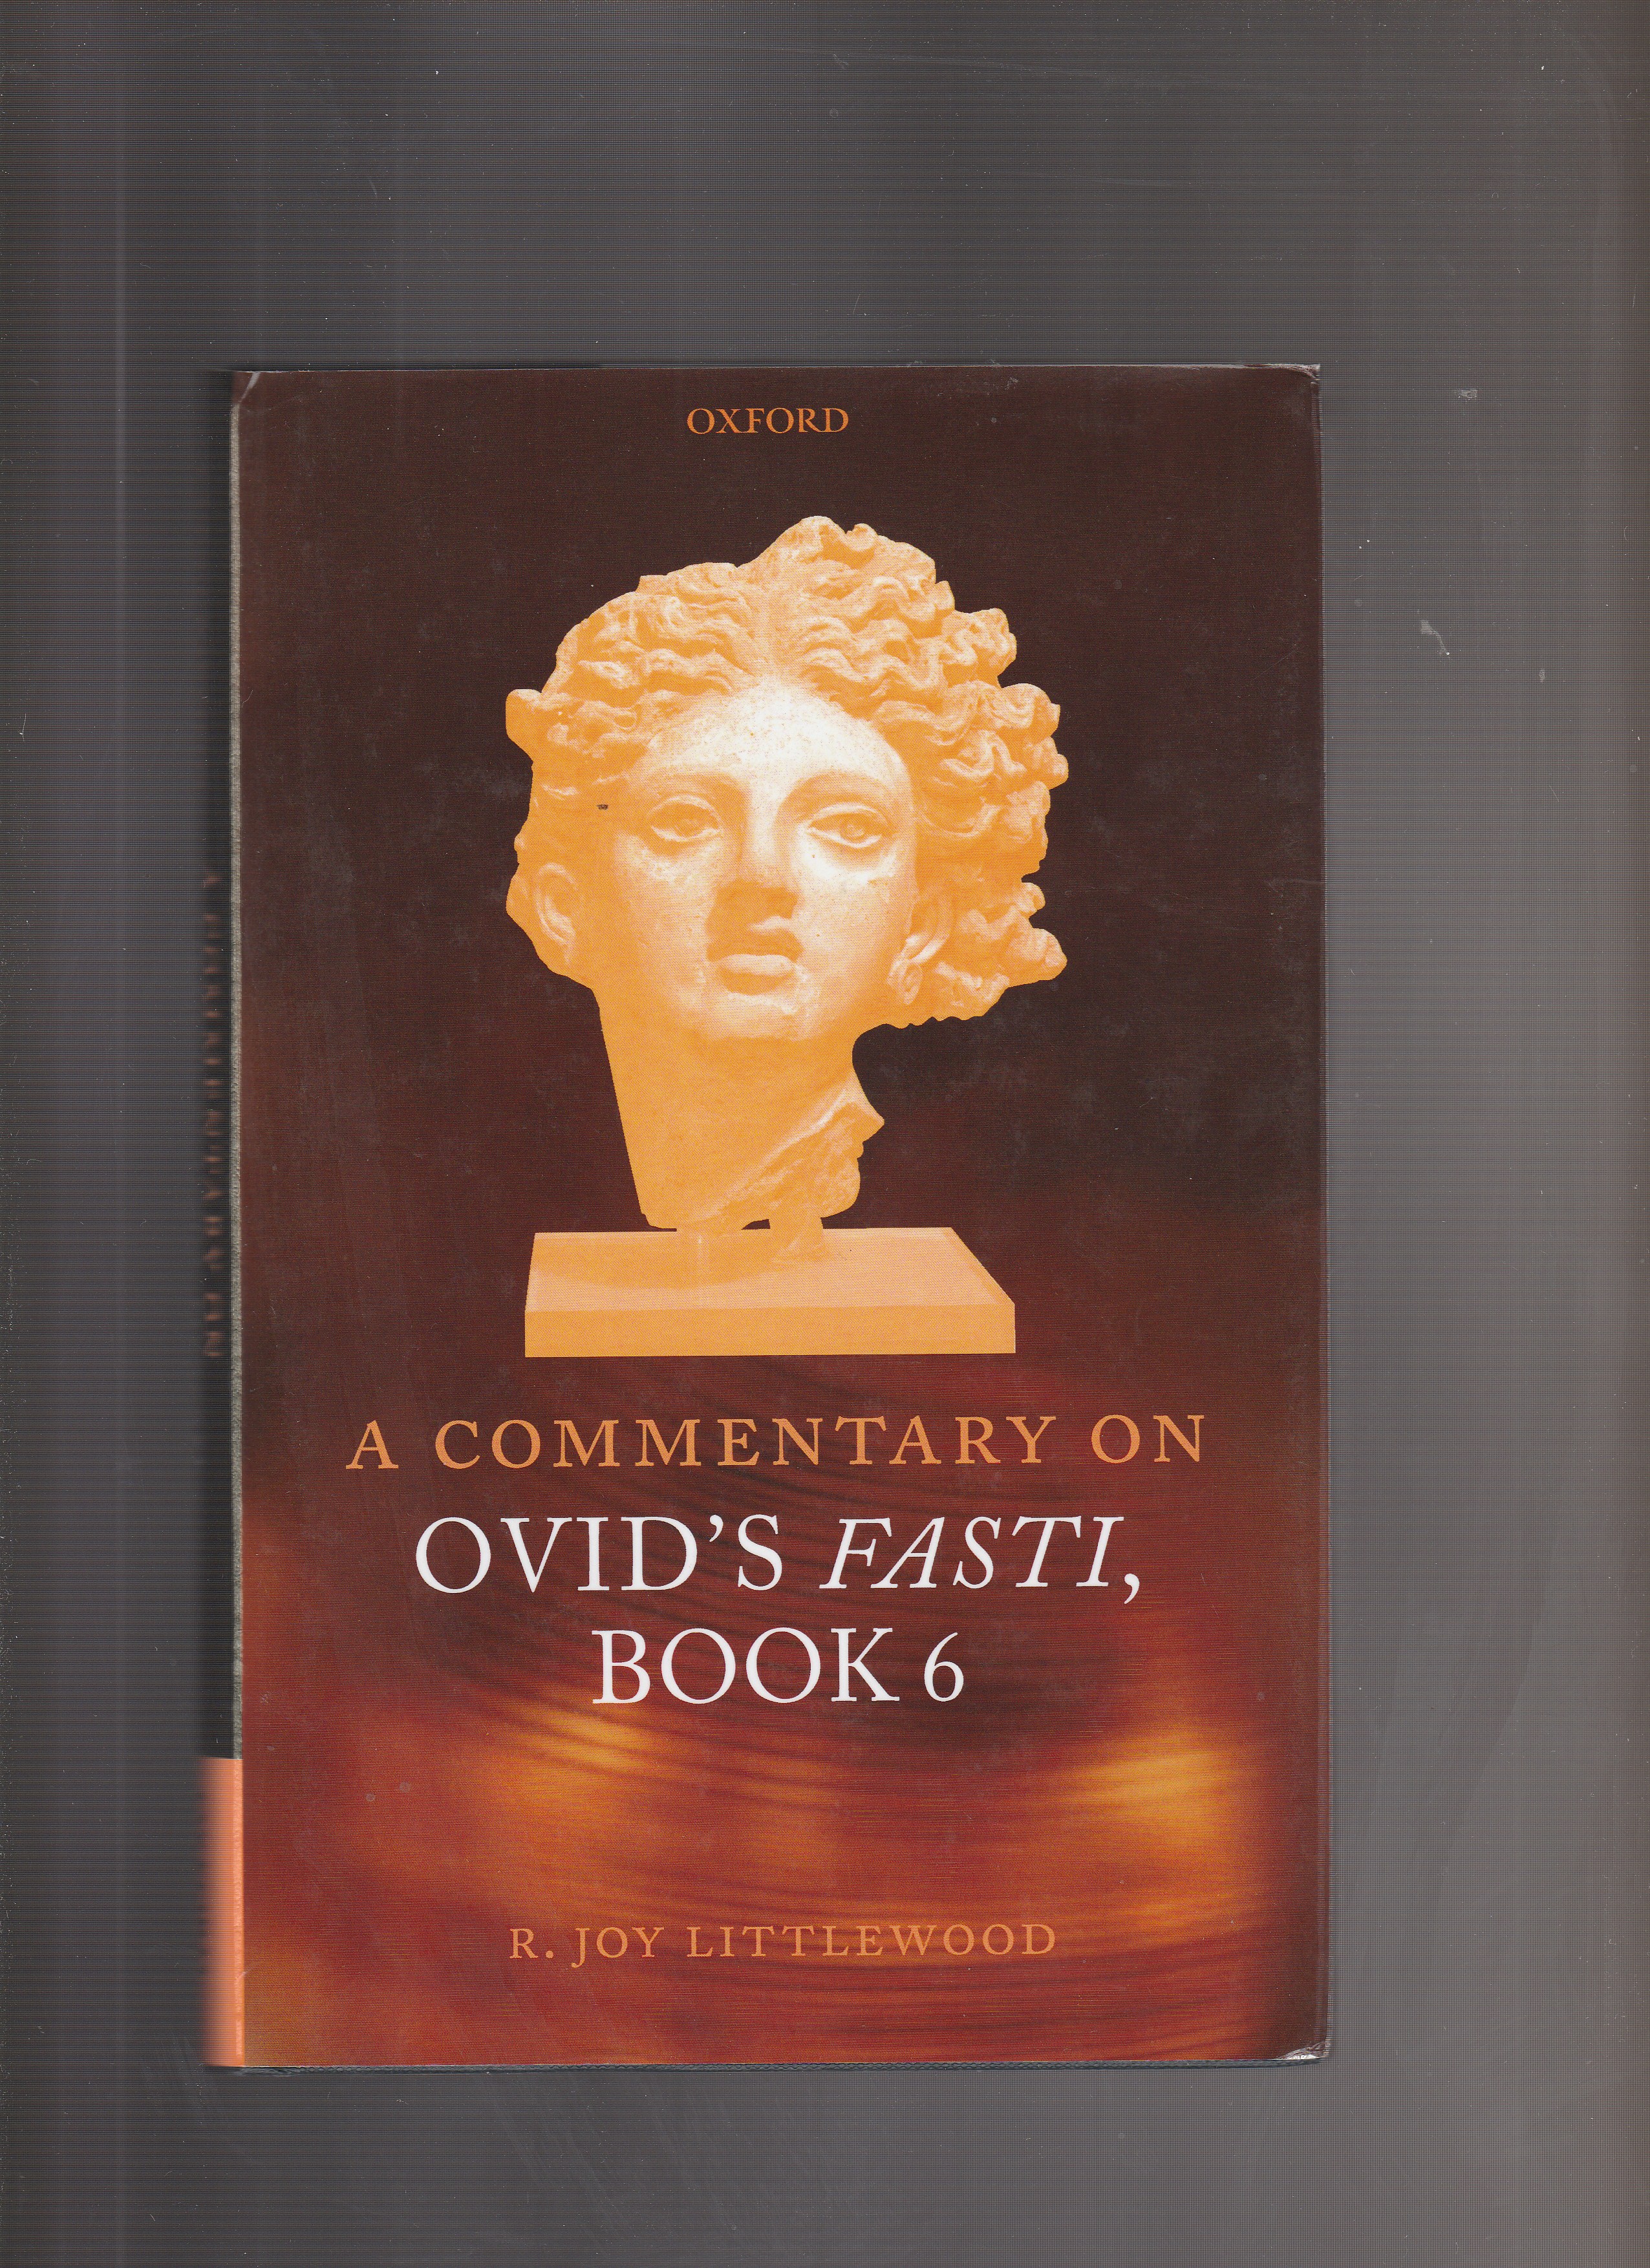 A COMMENTARY ON OVID'S FASTI, Book 6 - Littlewood, R. Joy